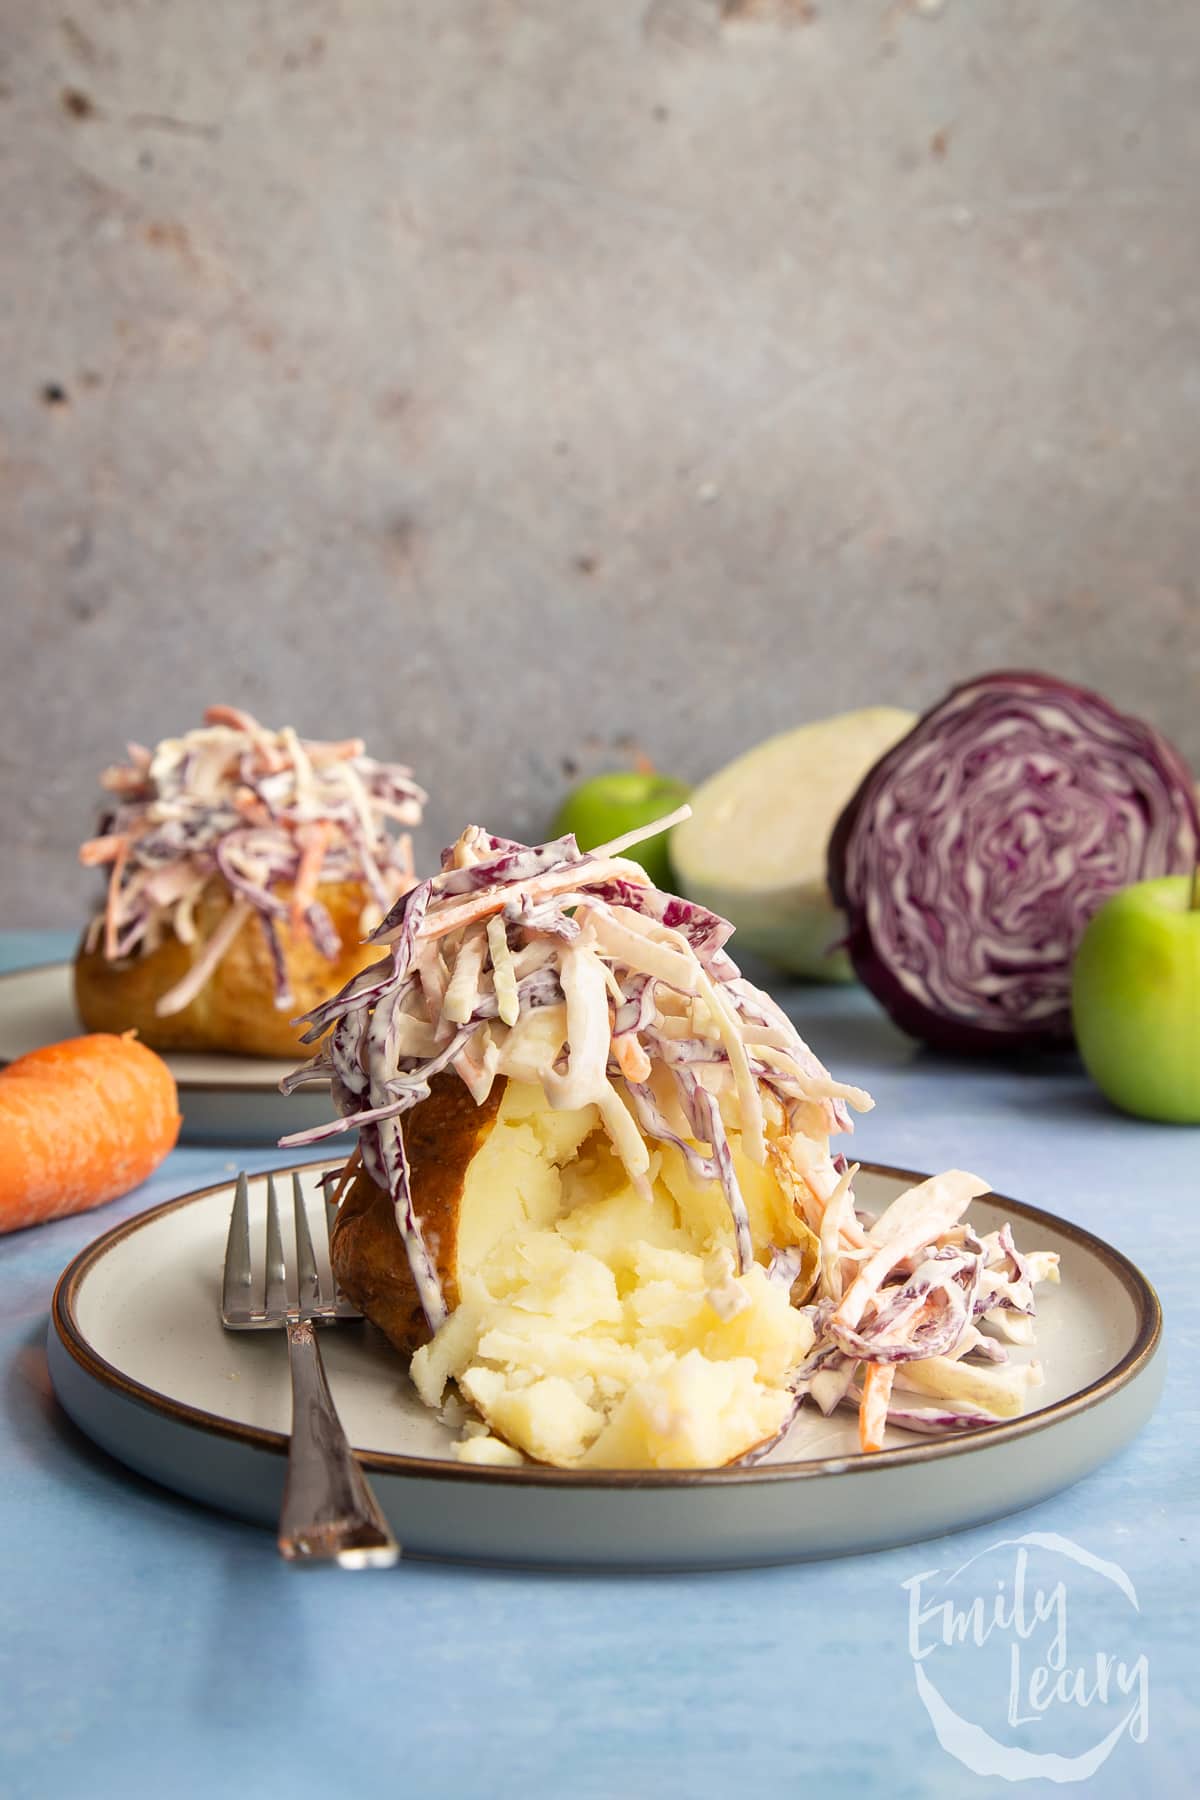 side view of coleslaw on top of a jacket potato on a white plate with a fork on the side.